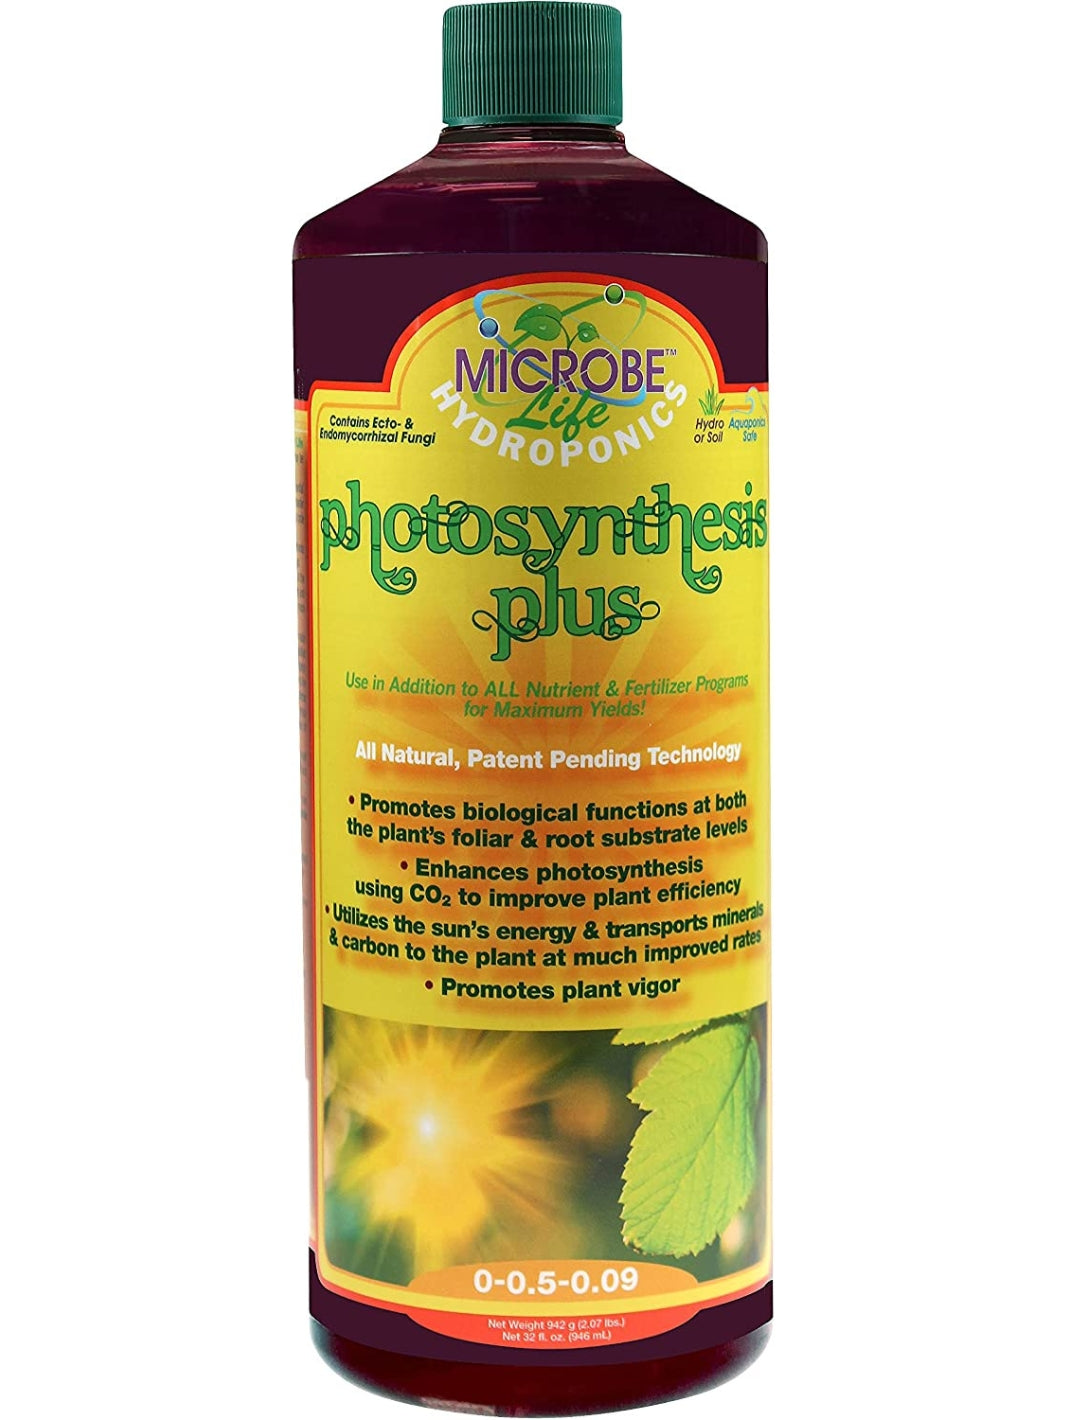 Microbe Life Hydroponics Photosynthesis Plus Microbial Inoculant in 1 Quart Bottle